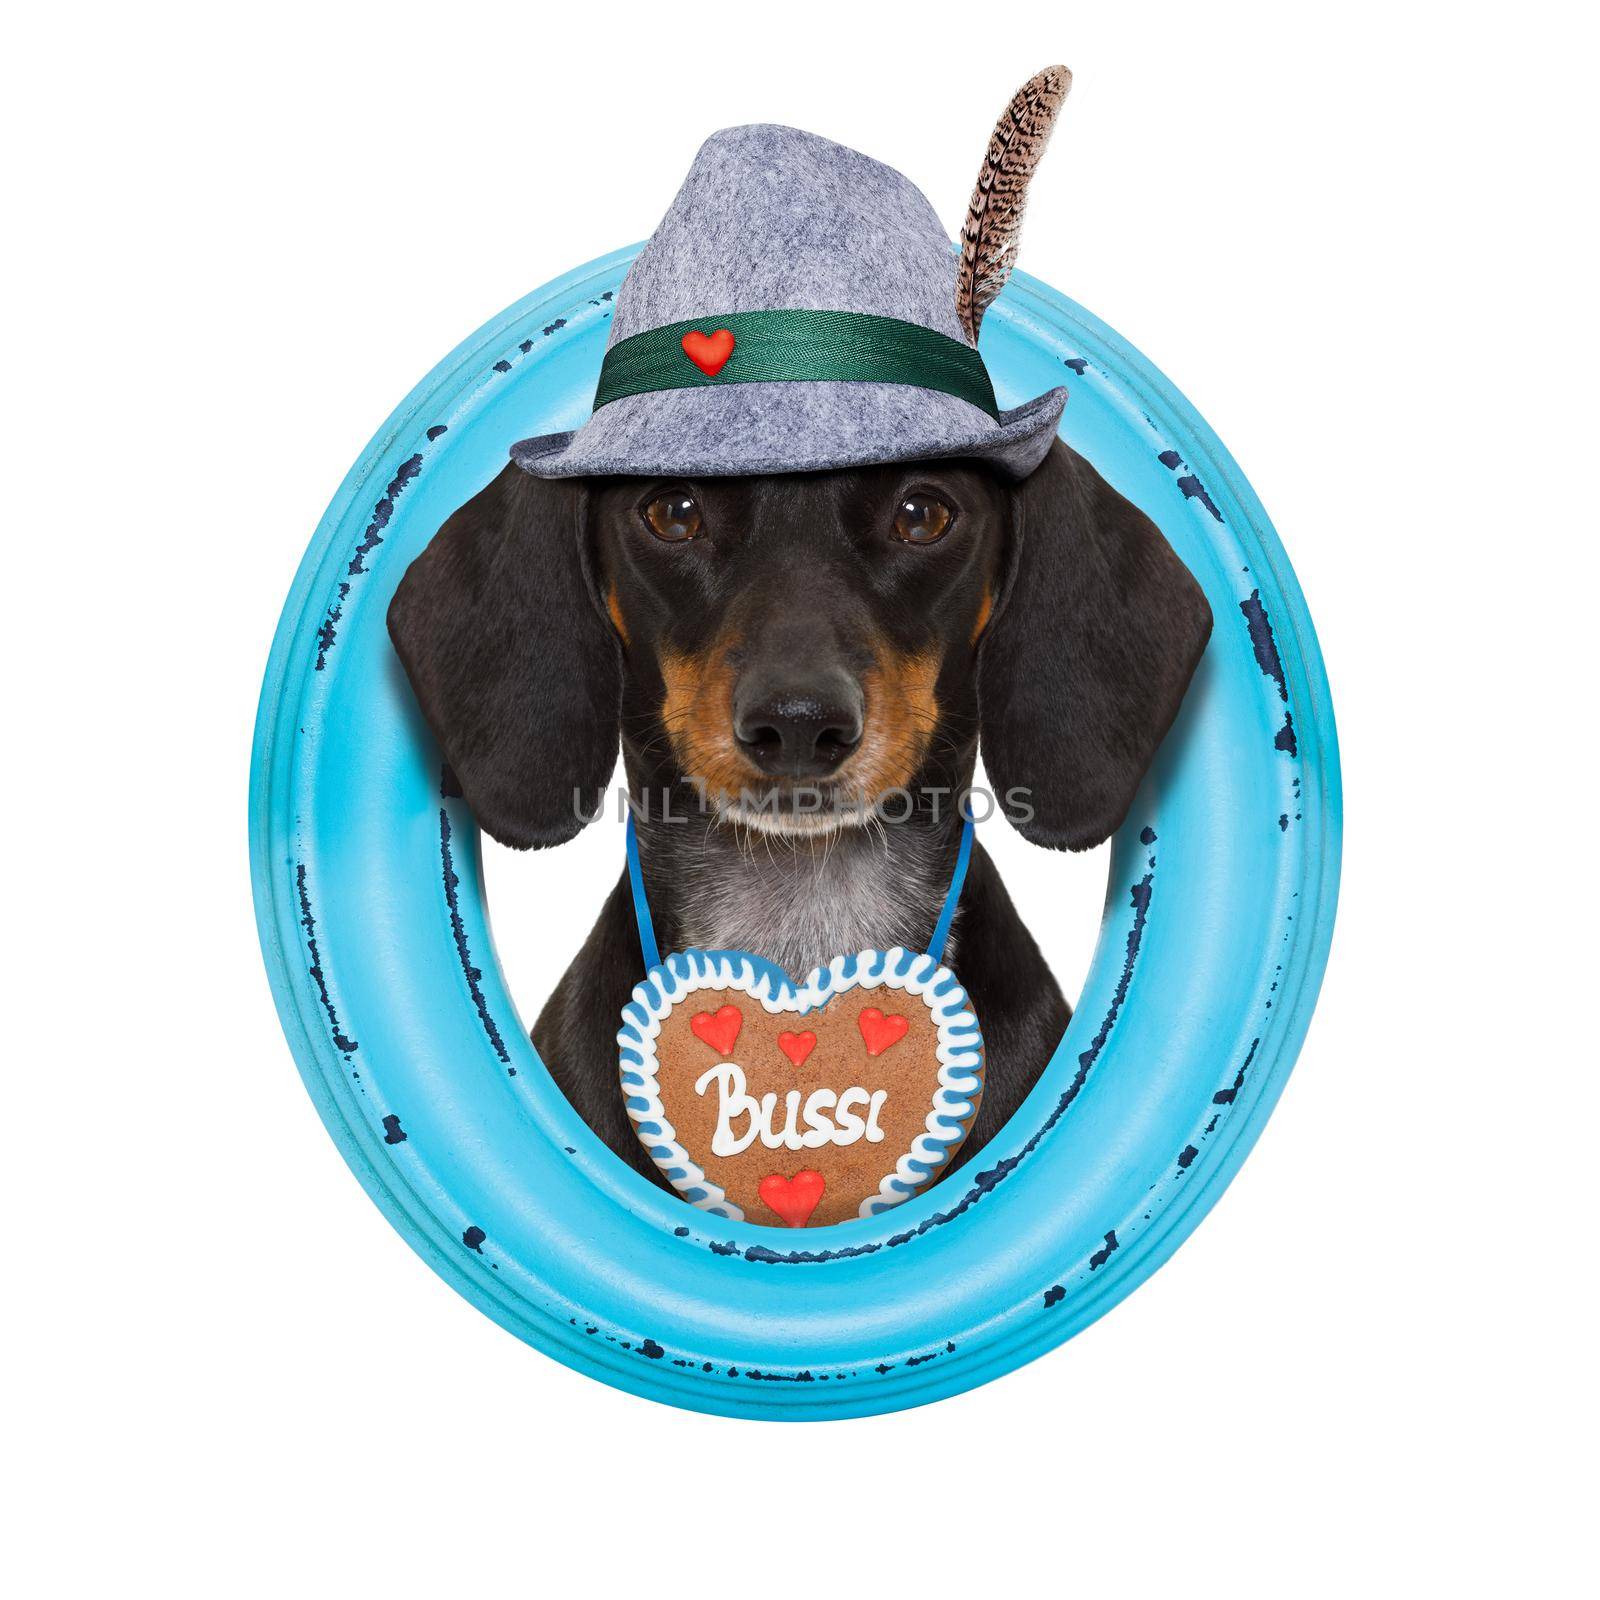 bavarian dachshund or sausage  dog with  gingerbread and beer mug, isolated on white background , ready for the beer celebration festival in munich,